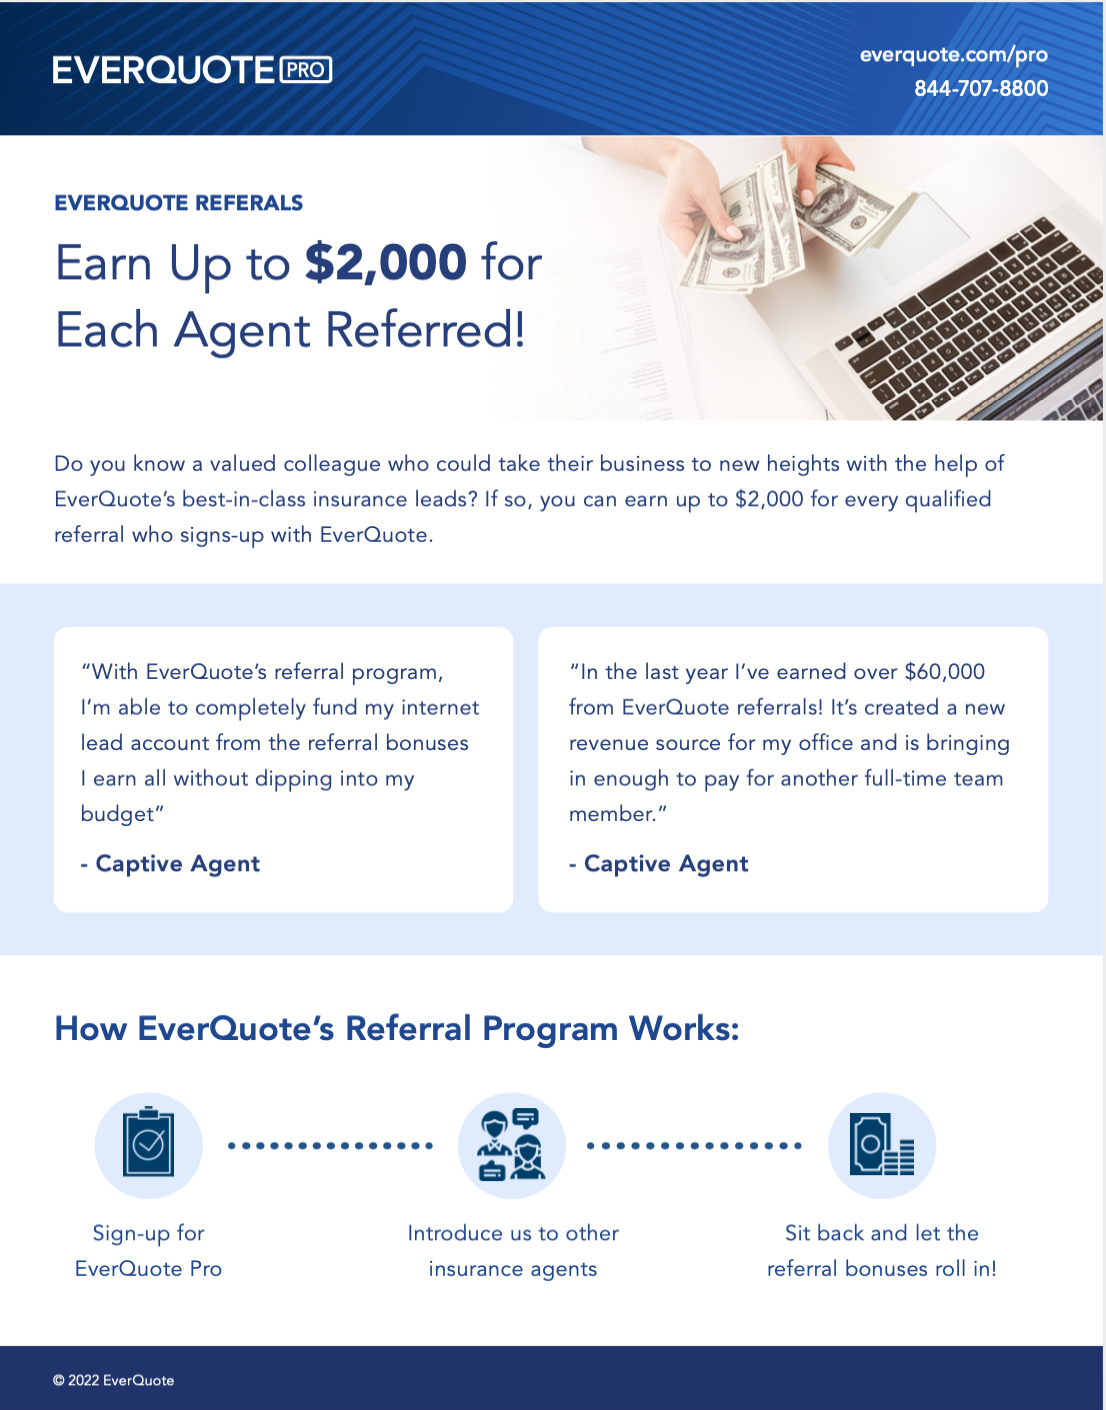 EverQuote's Referral Program: Earn Up to $2,000 for Every Agent Referred!